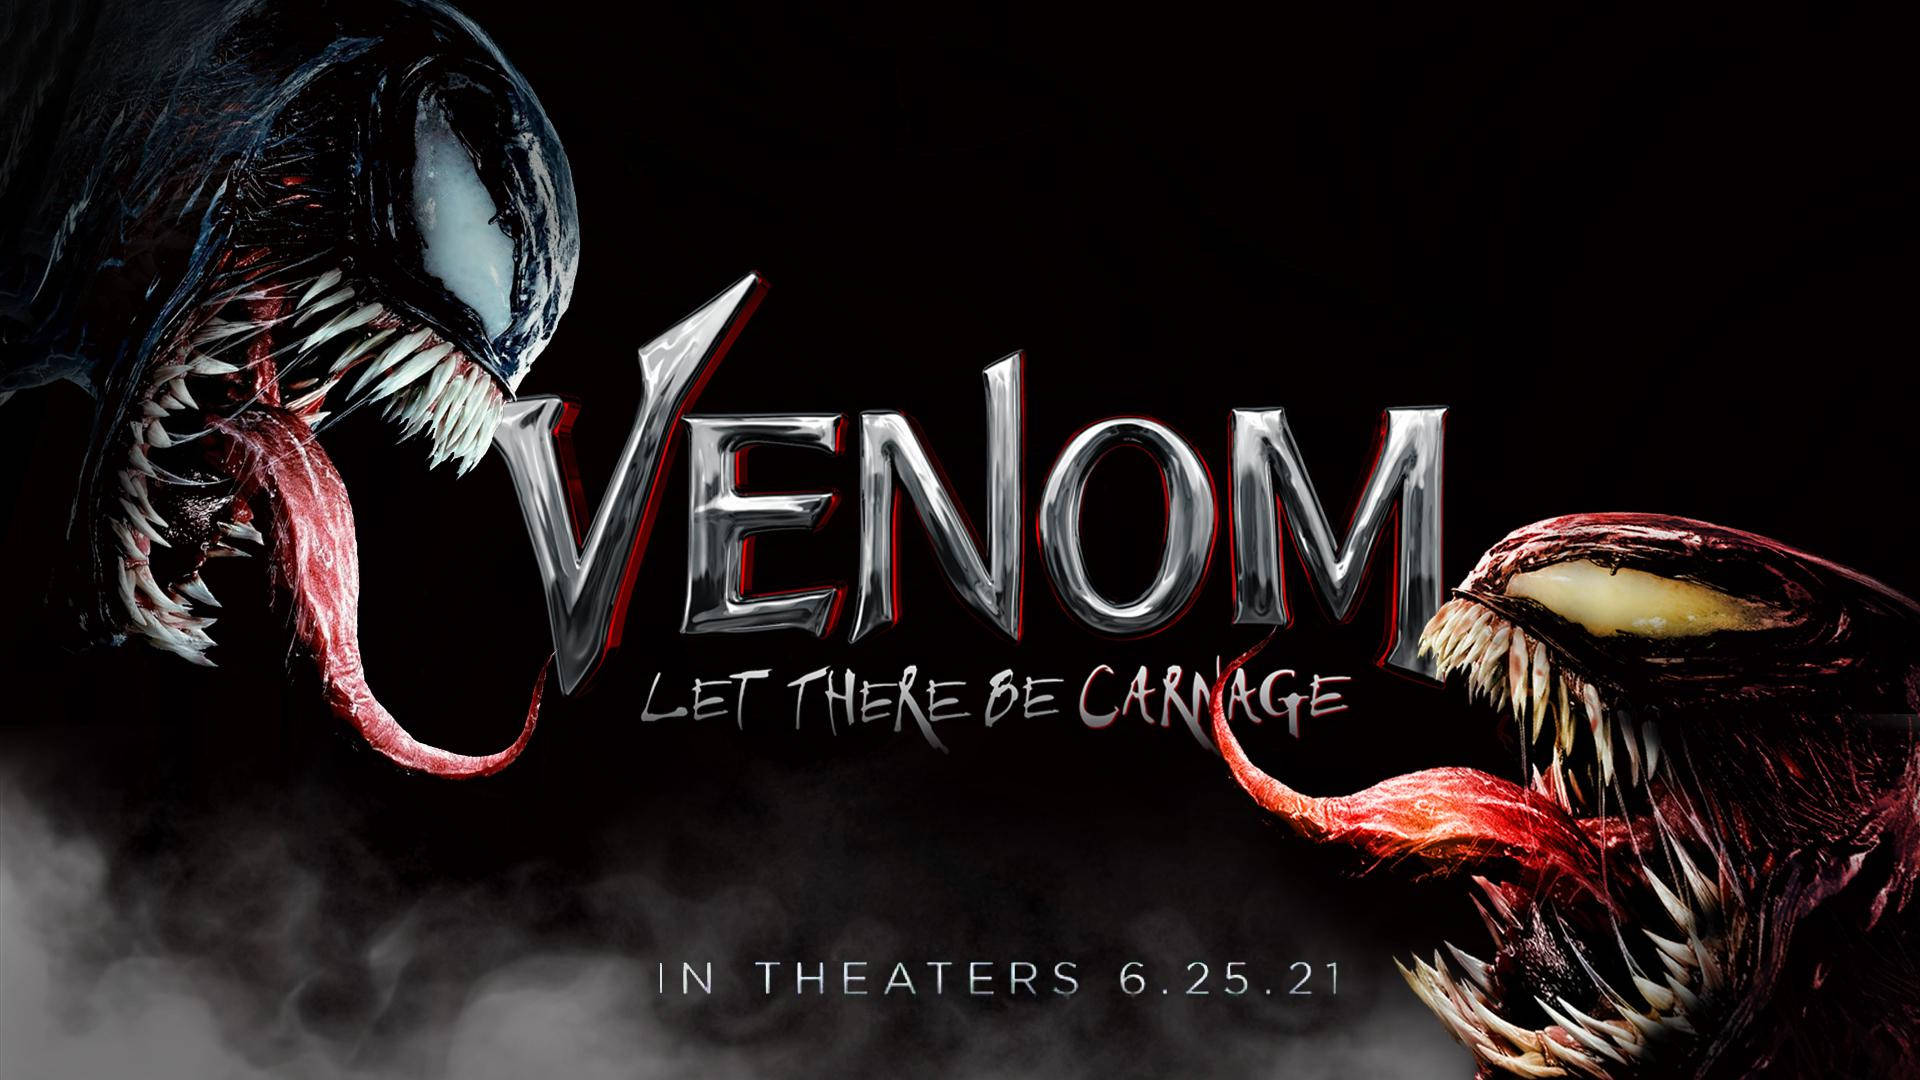 Venom Let There Be Carnage Raging Background